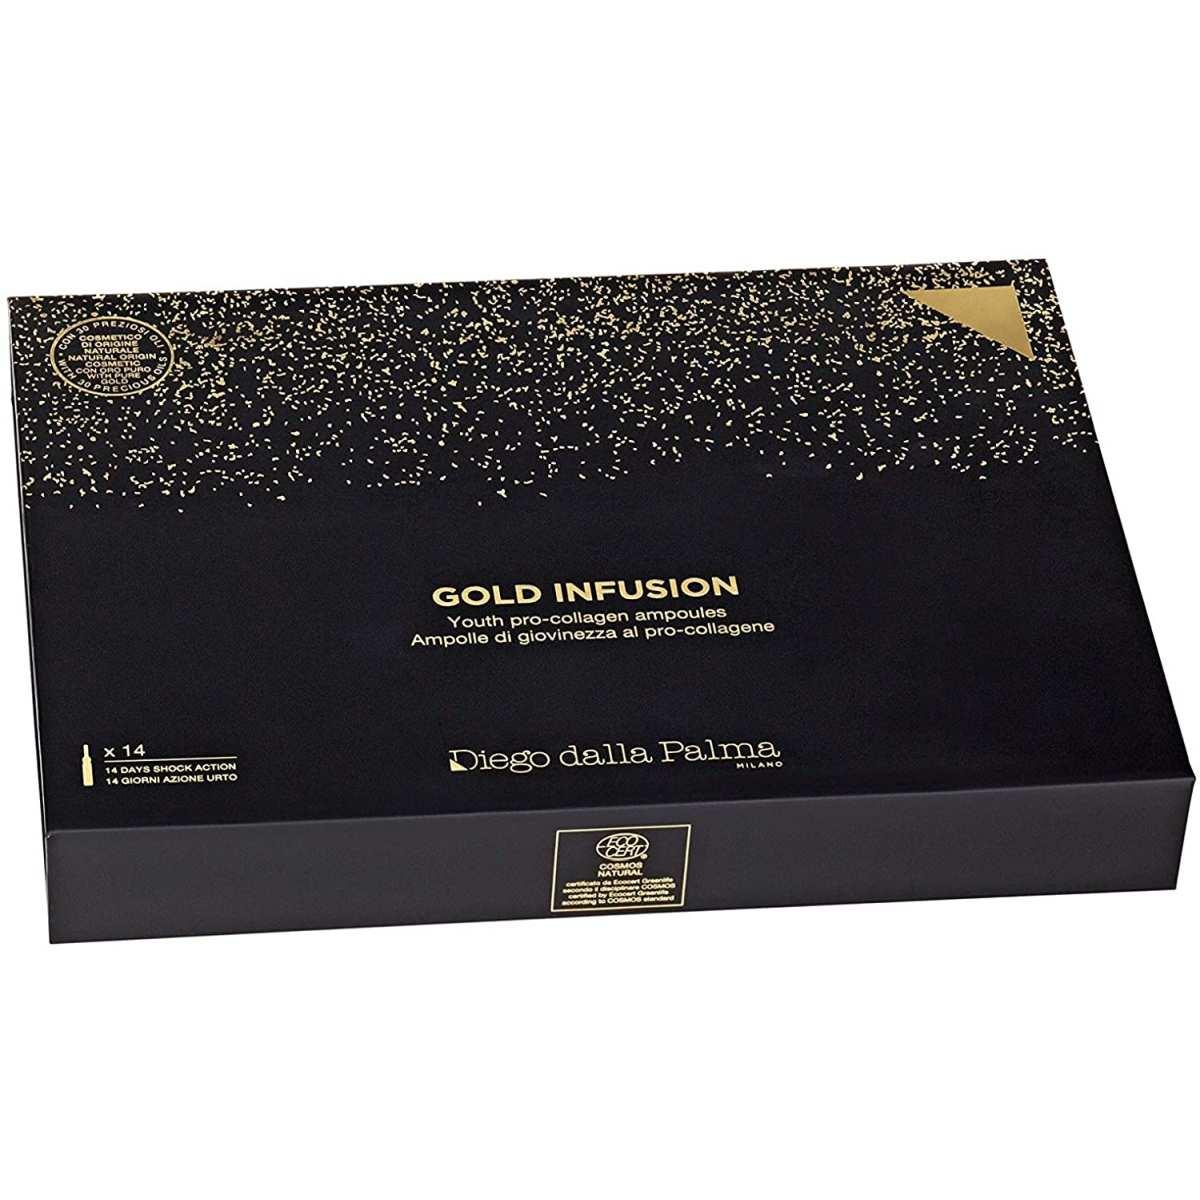 Gold infusion pro-collagene ampolle 2 ml